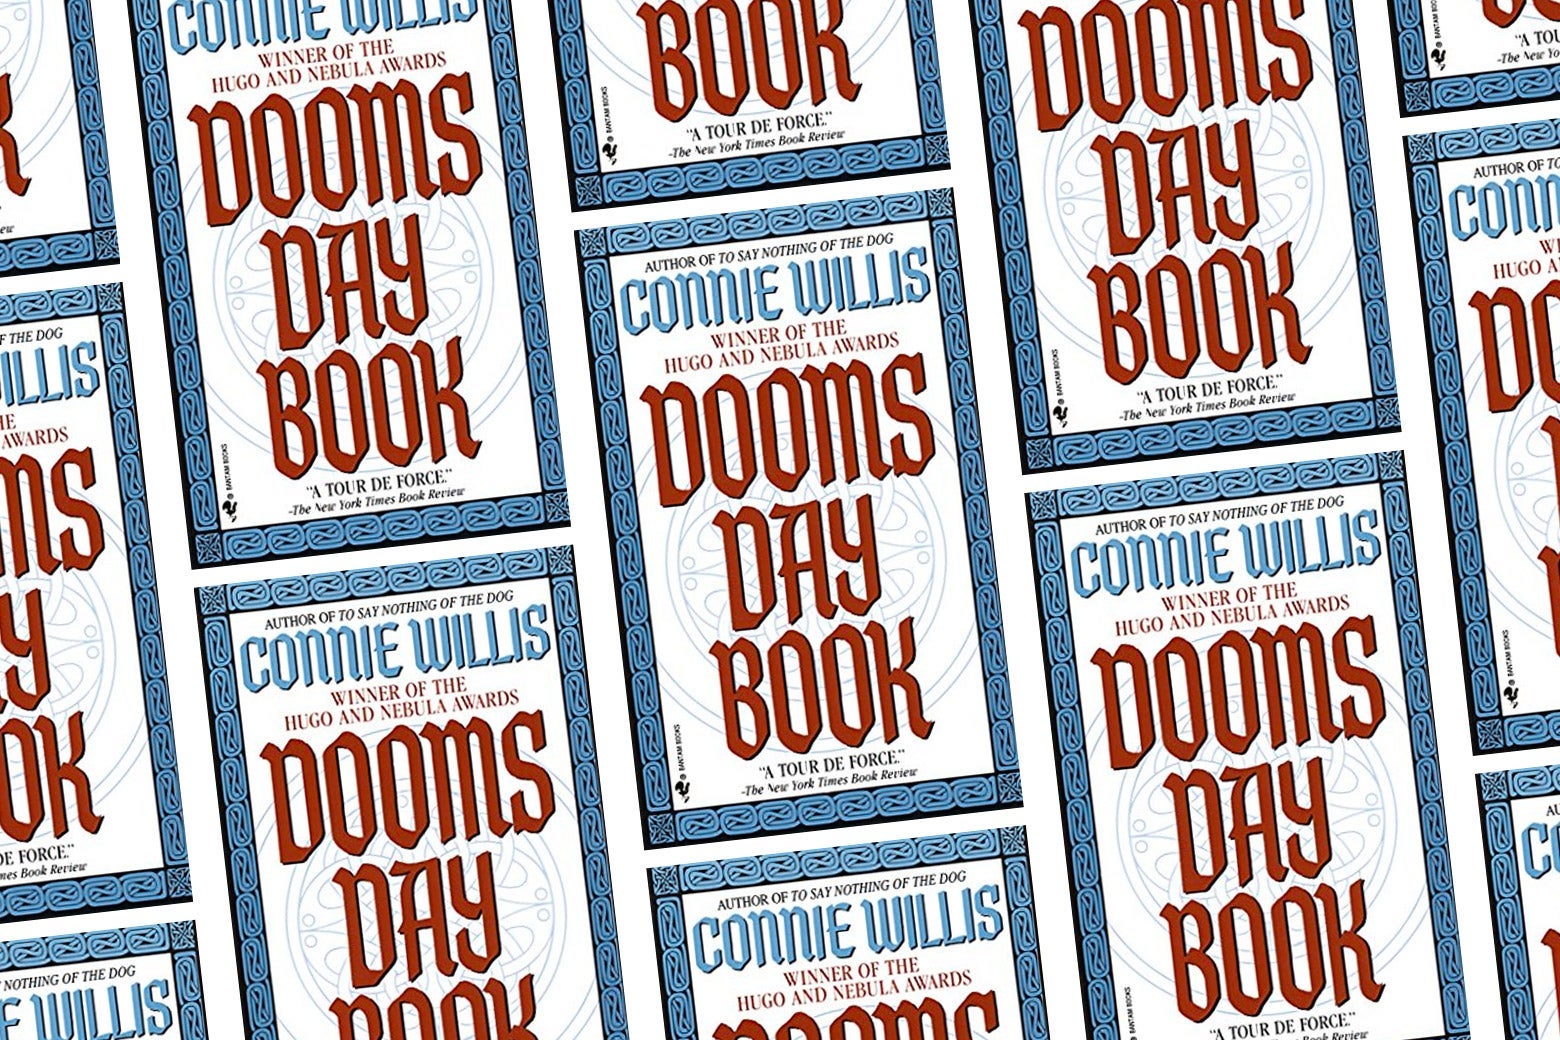 Dooms Day Book repeating.